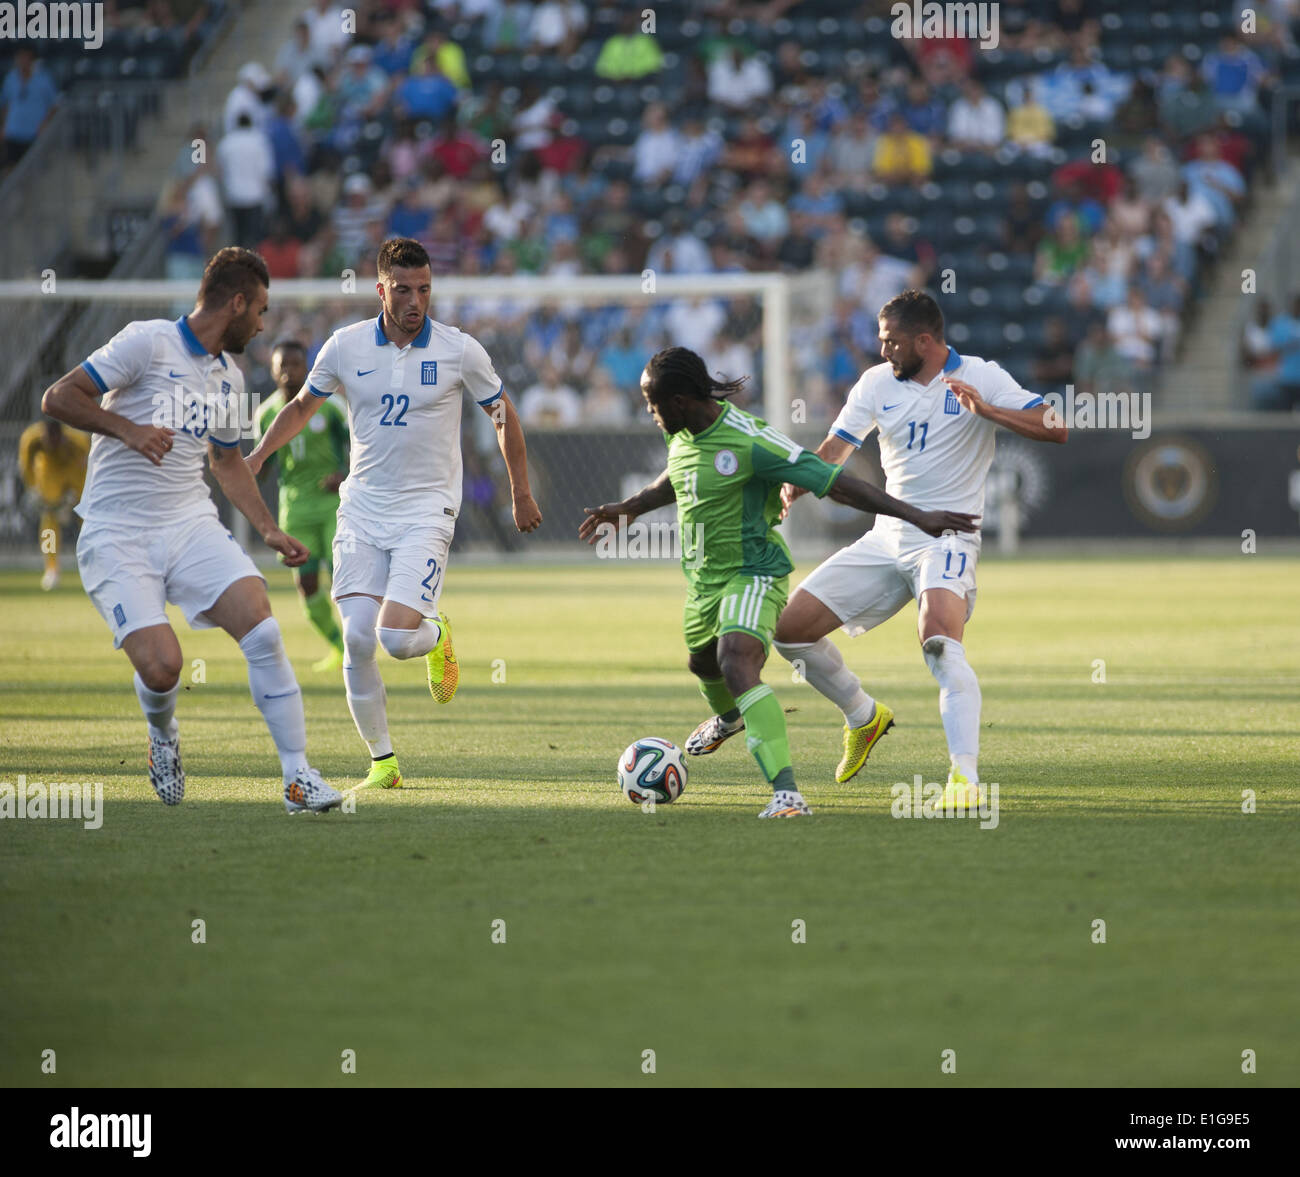 Chester, Pennsylvania, USA. 3rd June, 2014. VICTOR MOSES( 11) of Nigeria pushes the ball towards goal against ANDREA SAMARIS (22) and PANAGIOTIS TACHTSIDIS (23) of Greece. The international friendly match was held at PPL Park in Chester Pa © Ricky Fitchett/ZUMAPRESS.com/Alamy Live News Stock Photo